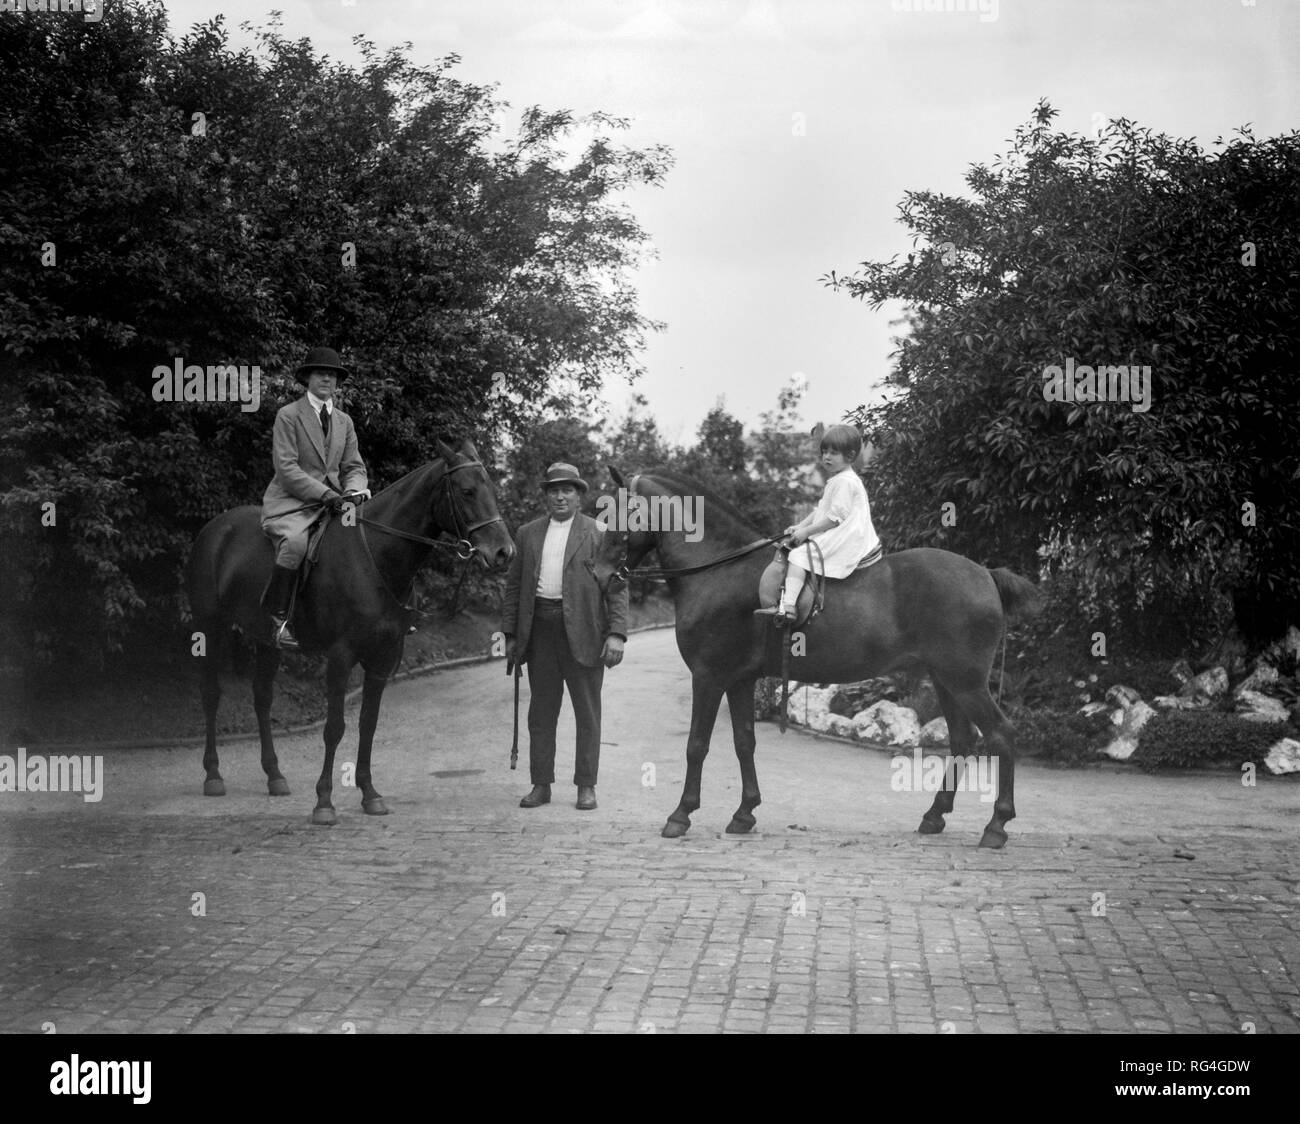 Kid on a horse vintage Black and White Stock Photos & Images - Alamy